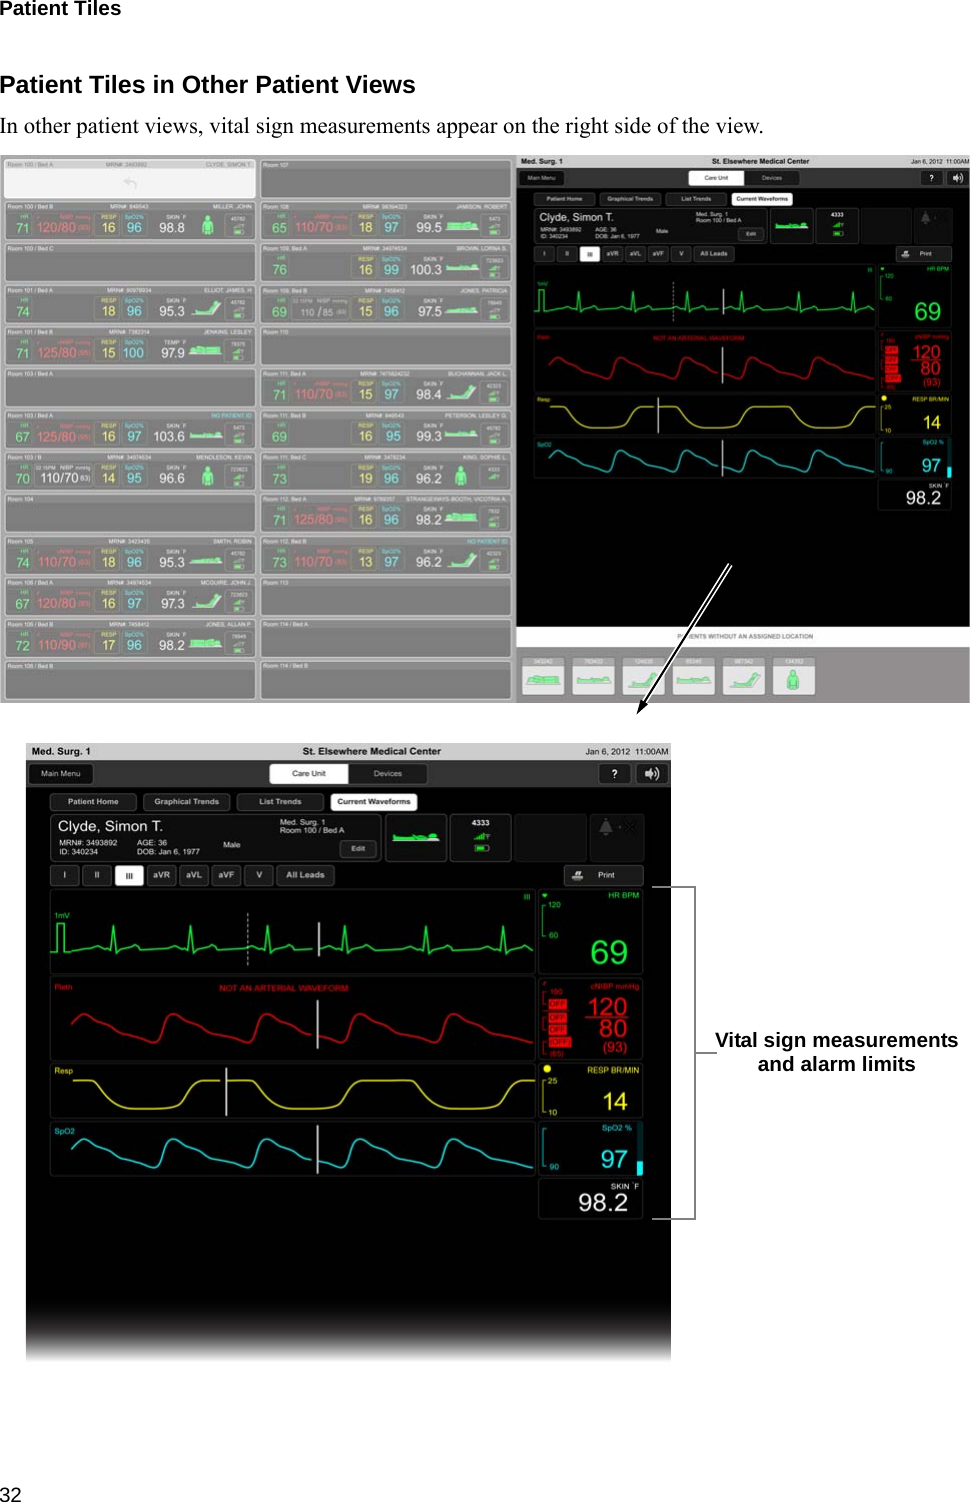 Patient Tiles 32Patient Tiles in Other Patient ViewsIn other patient views, vital sign measurements appear on the right side of the view.Vital sign measurementsand alarm limits